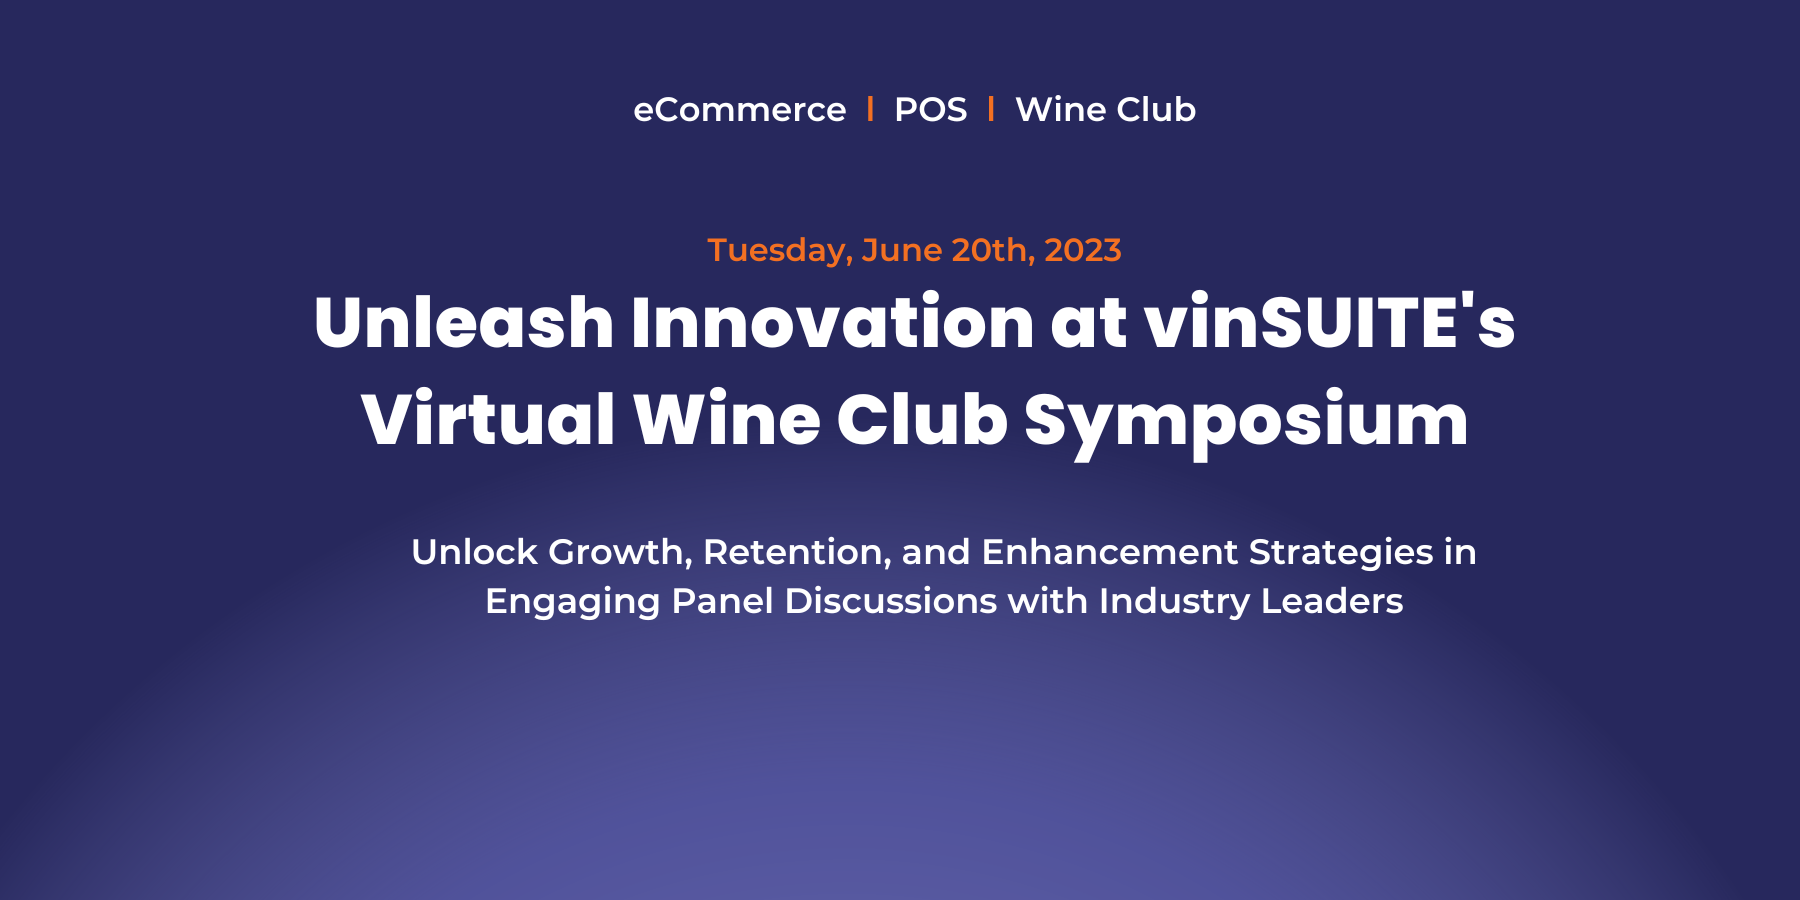 Tuesday, June 20th, 2023 - Unleash Innovation at vinSUITE's Virtual Wine Club Symposium - Unlock Growth, Retention, and Enhancement Strategies in Engaging Panel Discussions with Industry Leaders